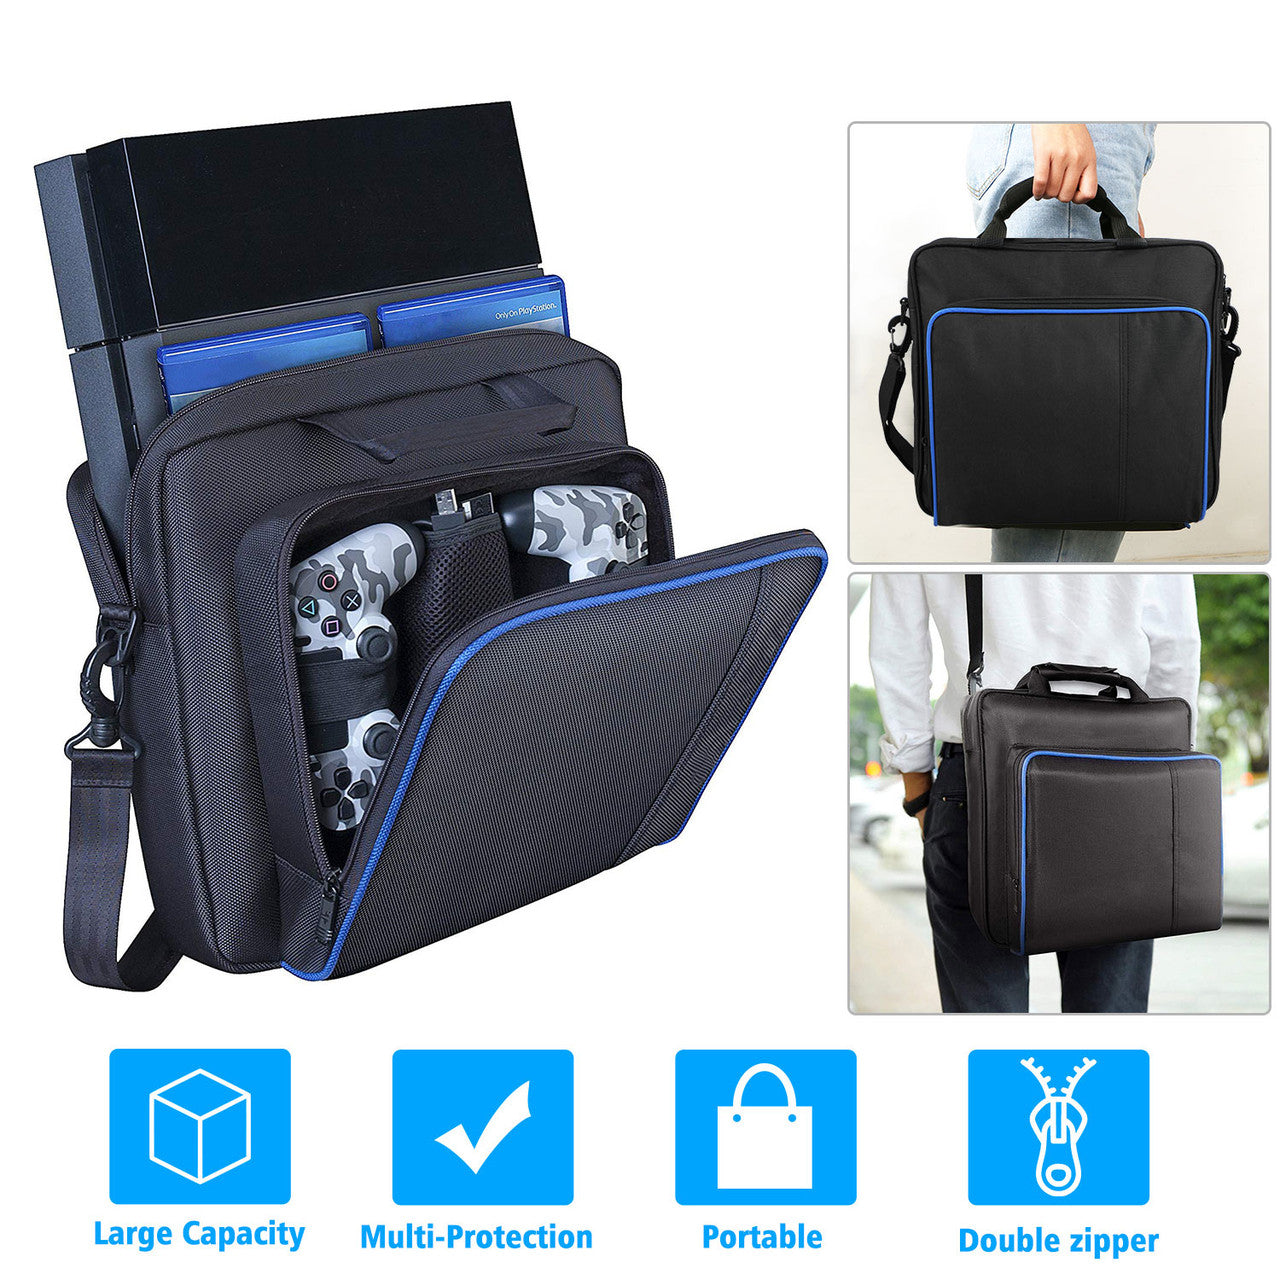 Black Multifunctional Carry Bag Travel Case Handbag For Sony PlayStation 4 PS4 Console and Accessories